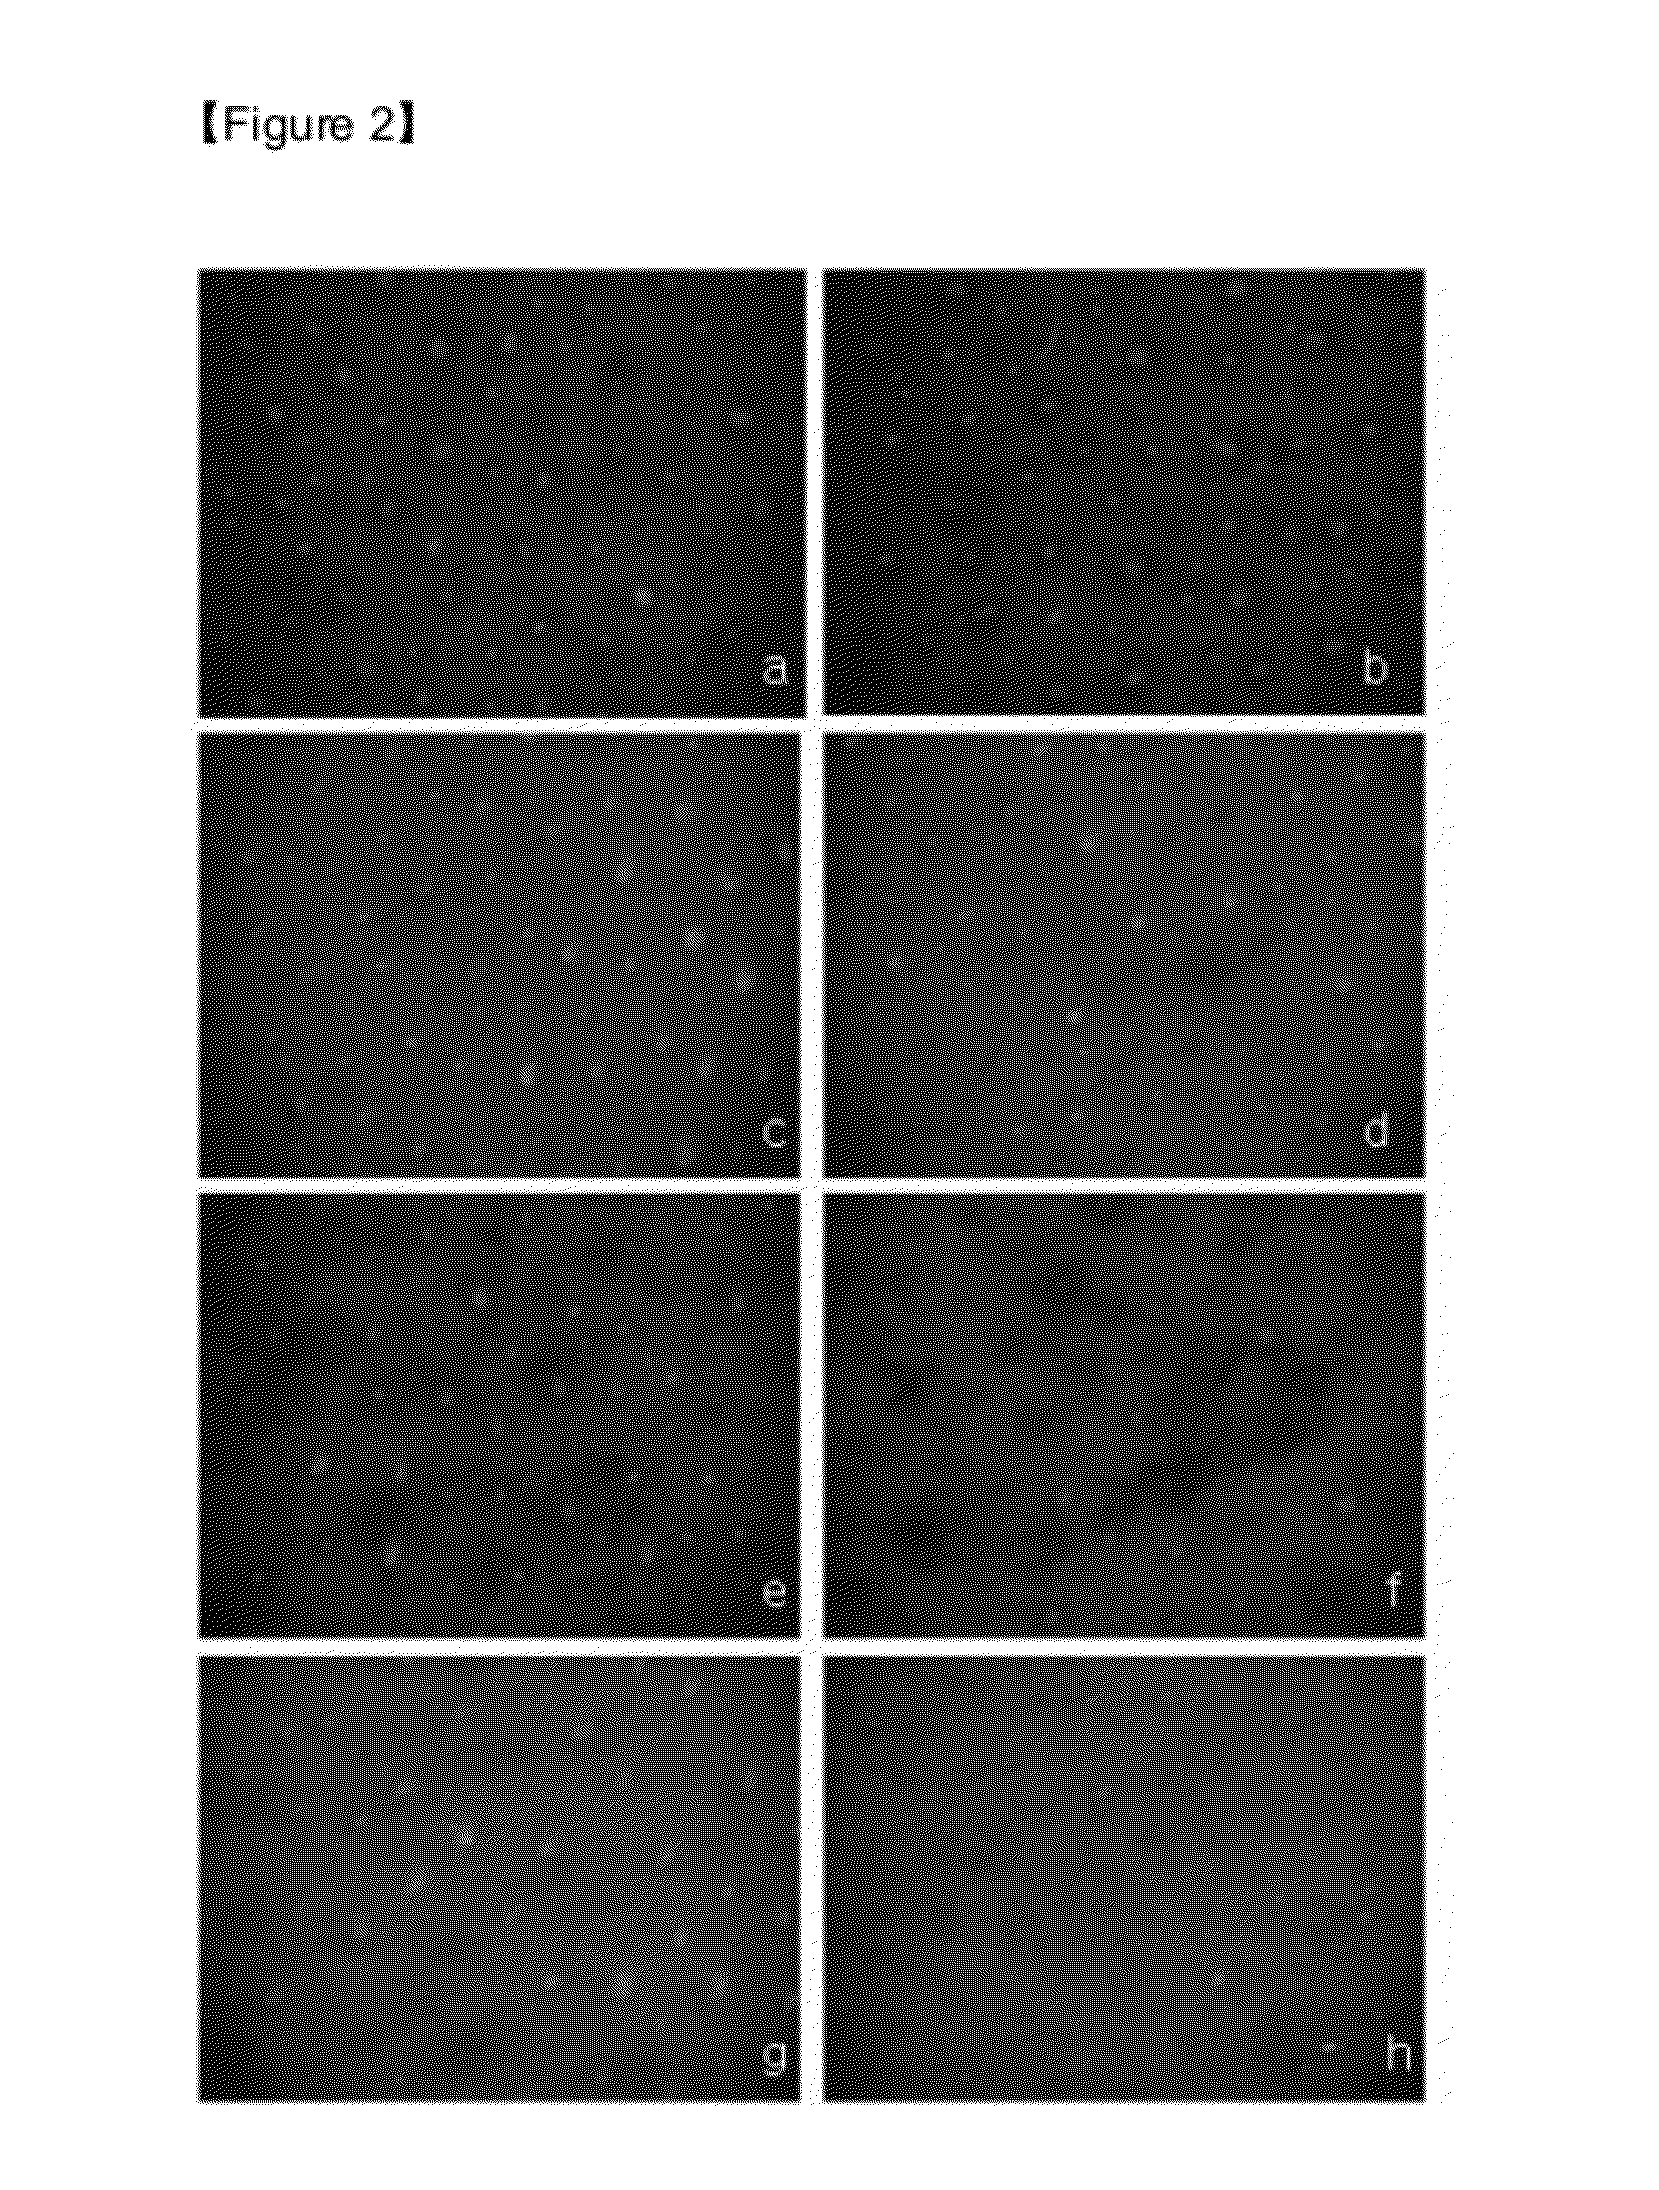 Composition for skin improvement comprising hexamidines and retinoids